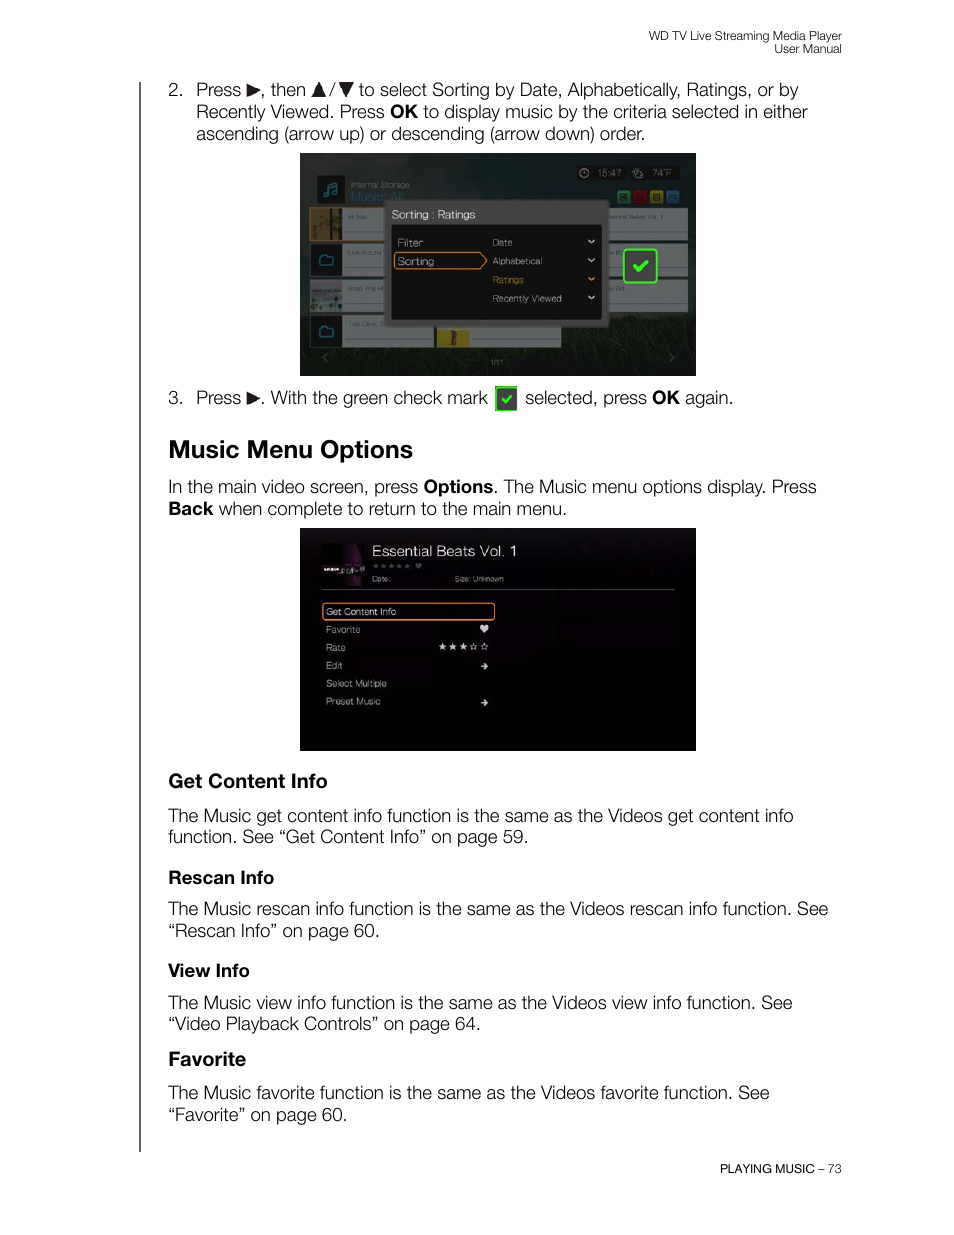 Music menu options, Get content info, Rescan info | View info, Favorite | Western Digital WD TV Live Streaming Media Player (Gen 3) User Manual User Manual | Page 78 / 237